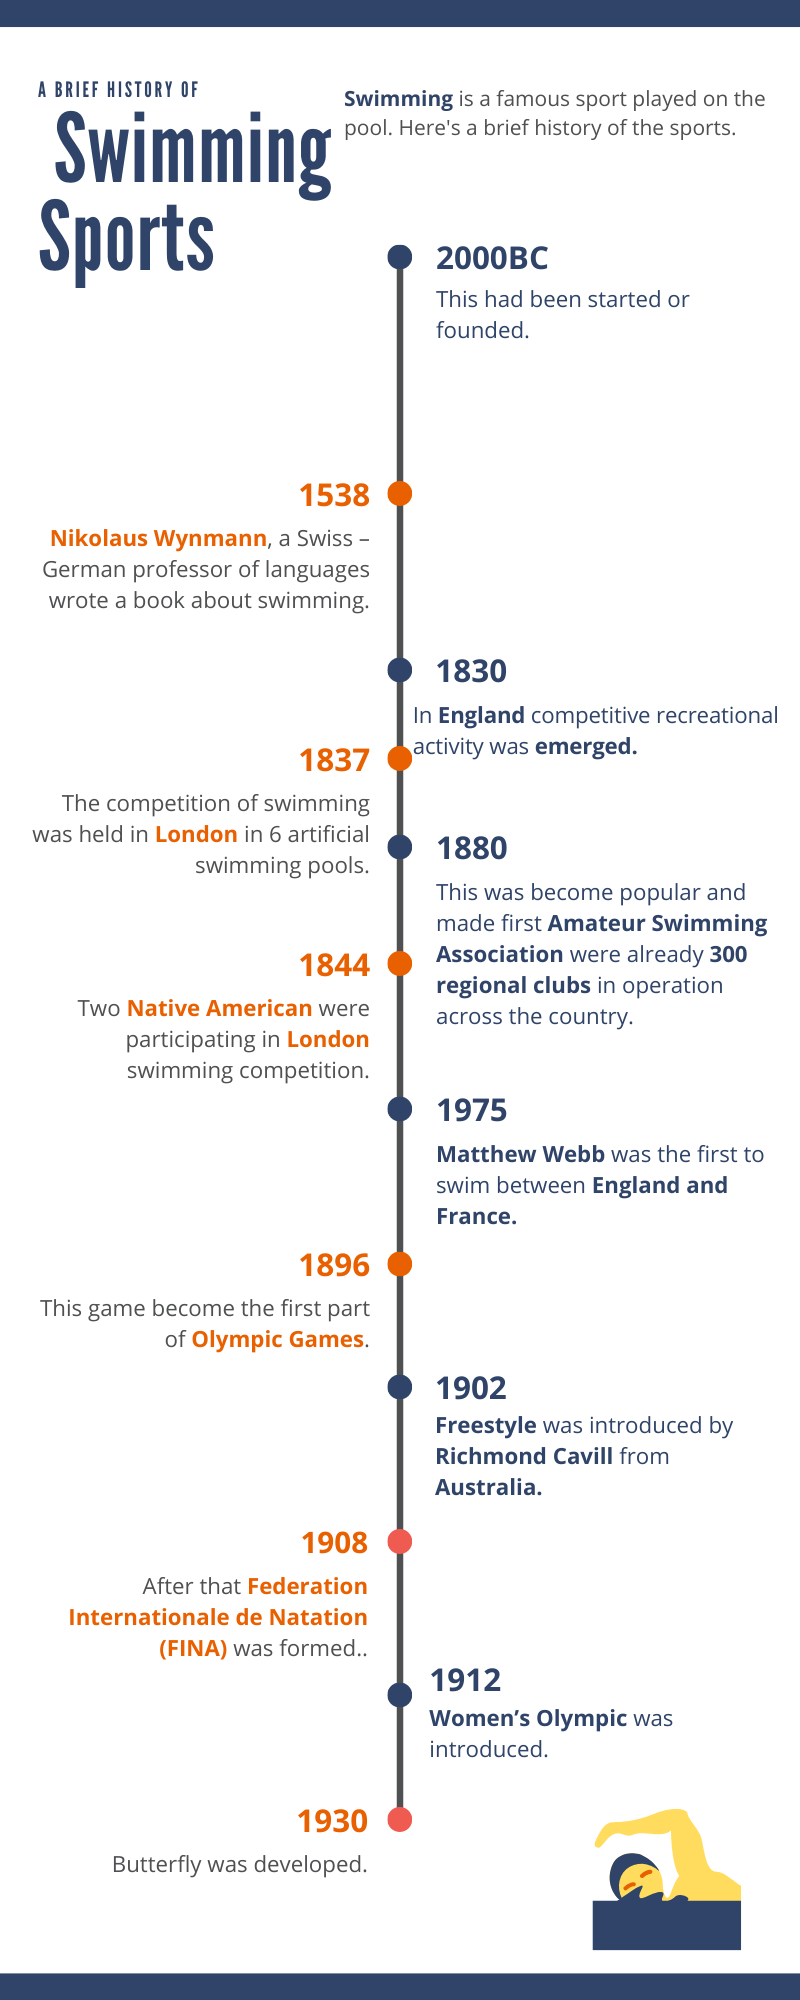 The Brief History of Swimming as sports.